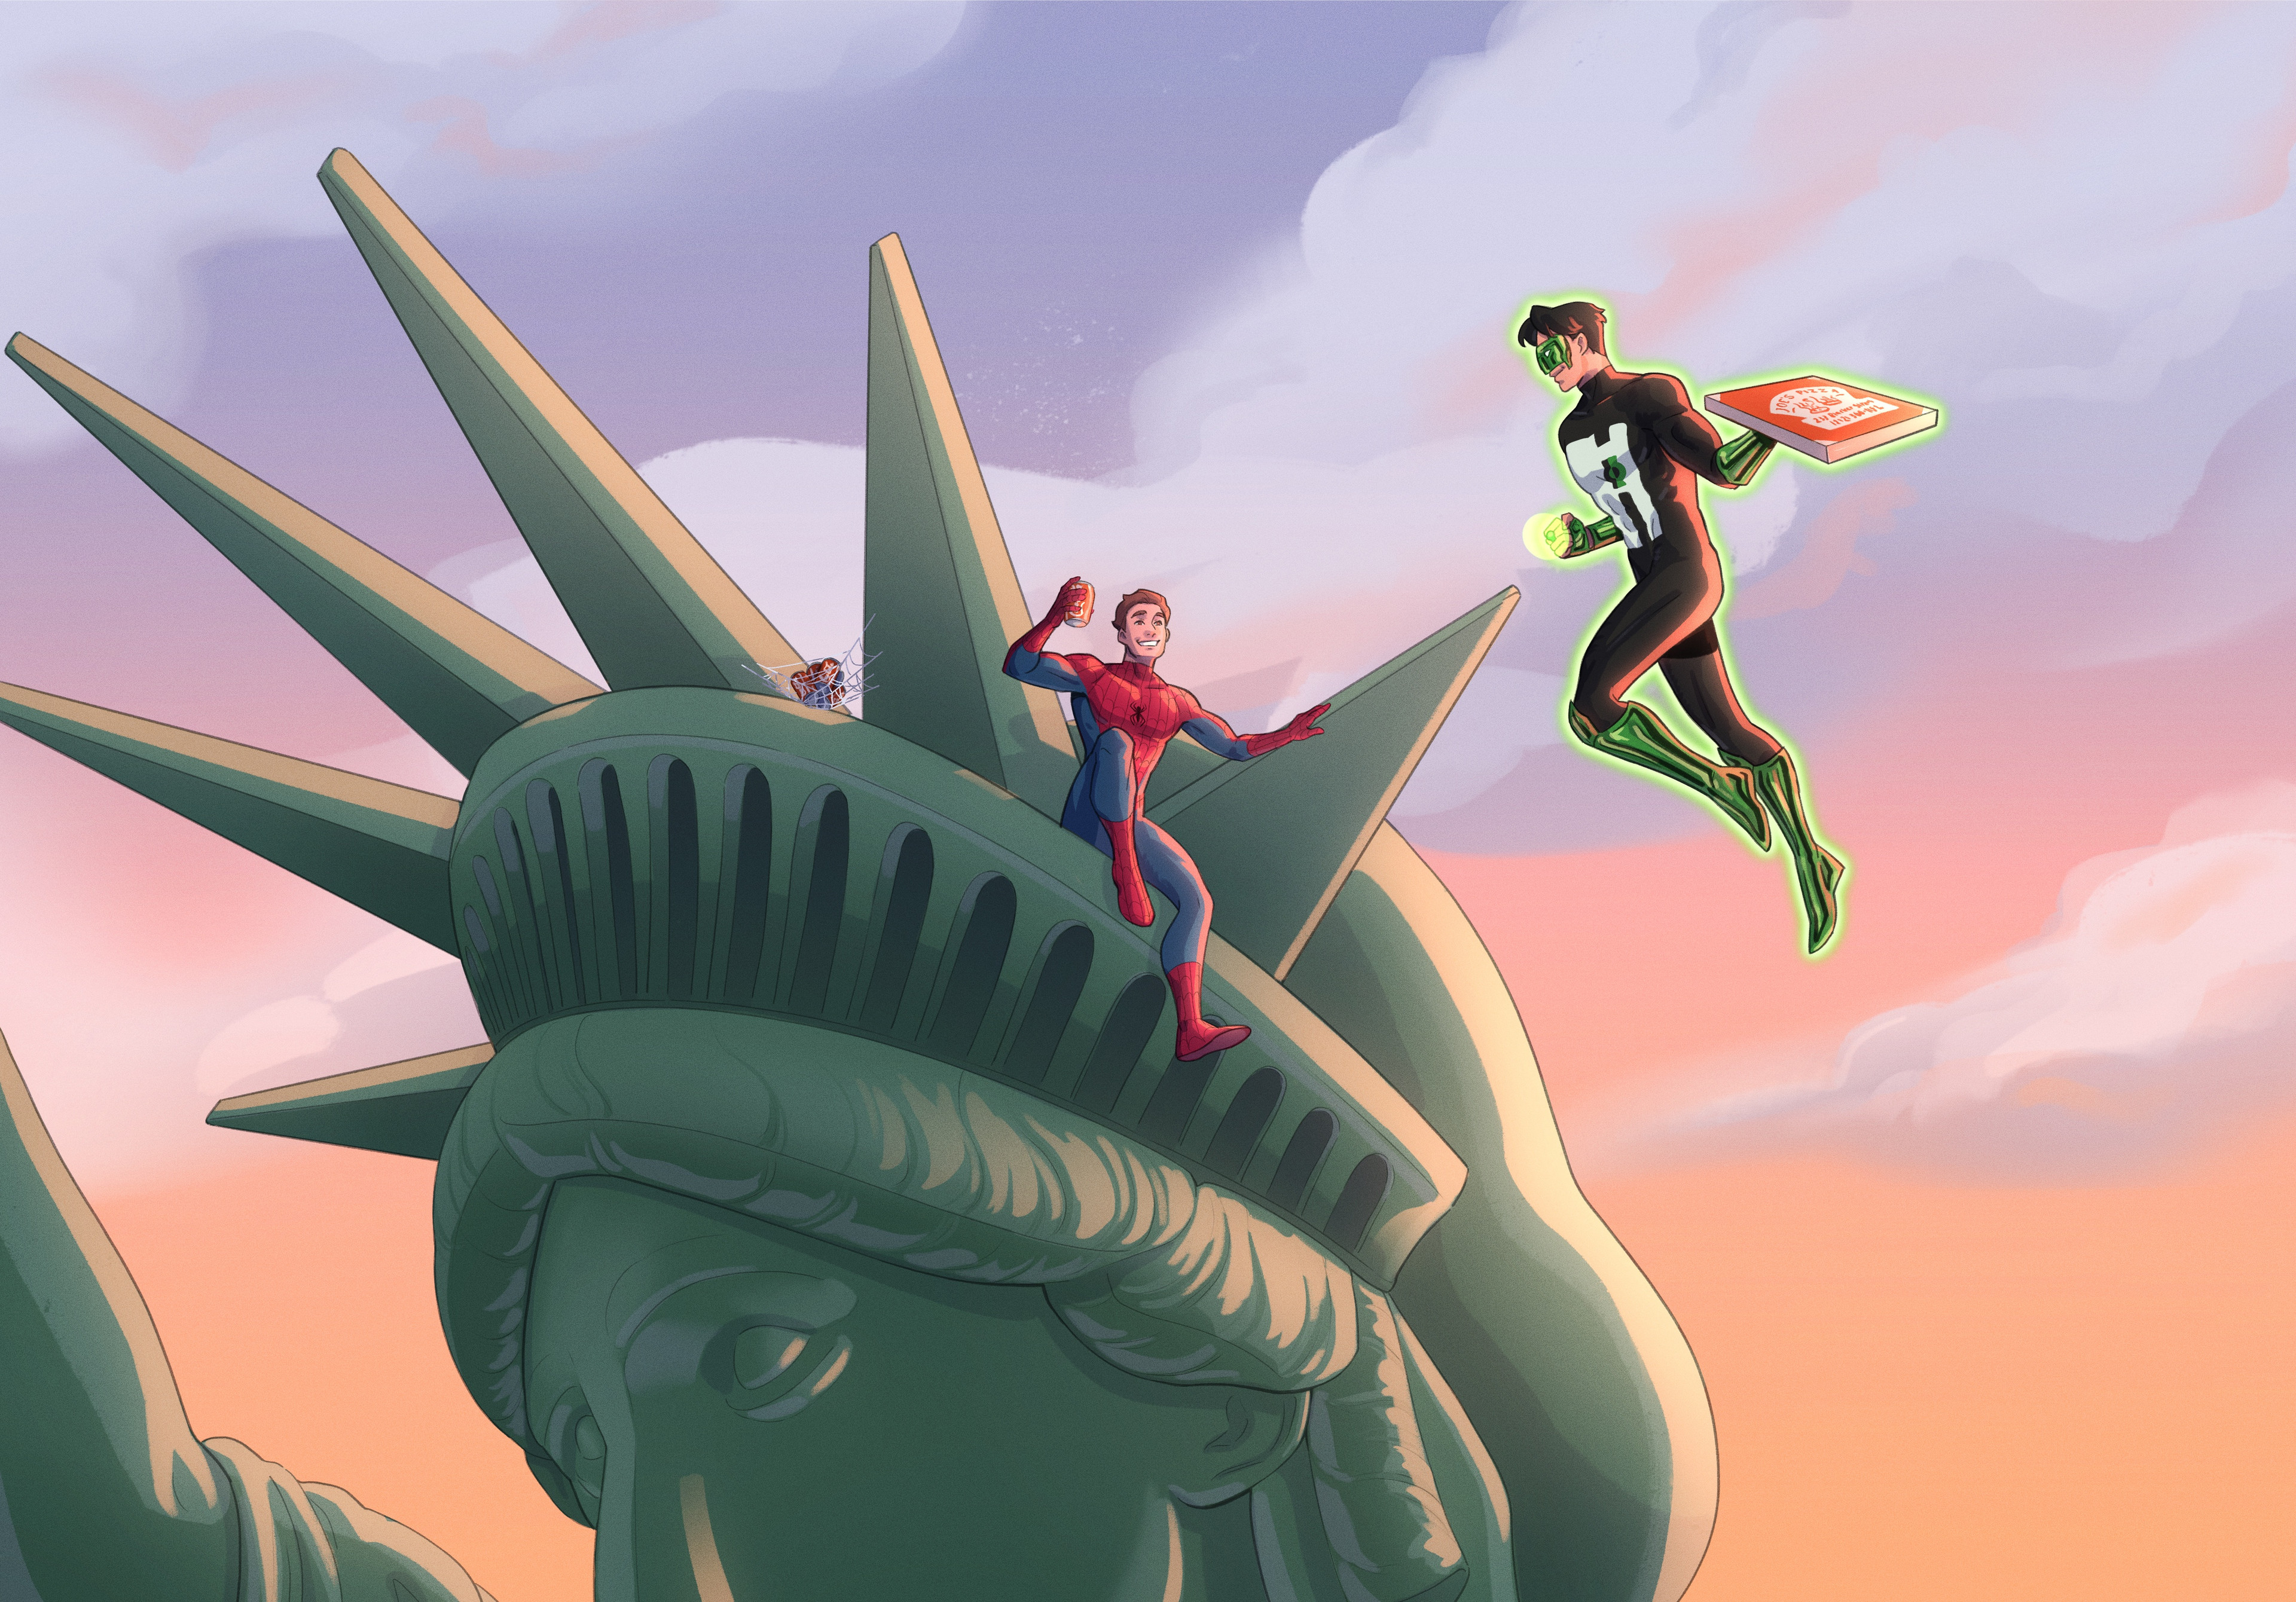 Commission for @MarSanJ47 on twitter, Peter Parker and Kyle Rayner from Marvel and DC Comics